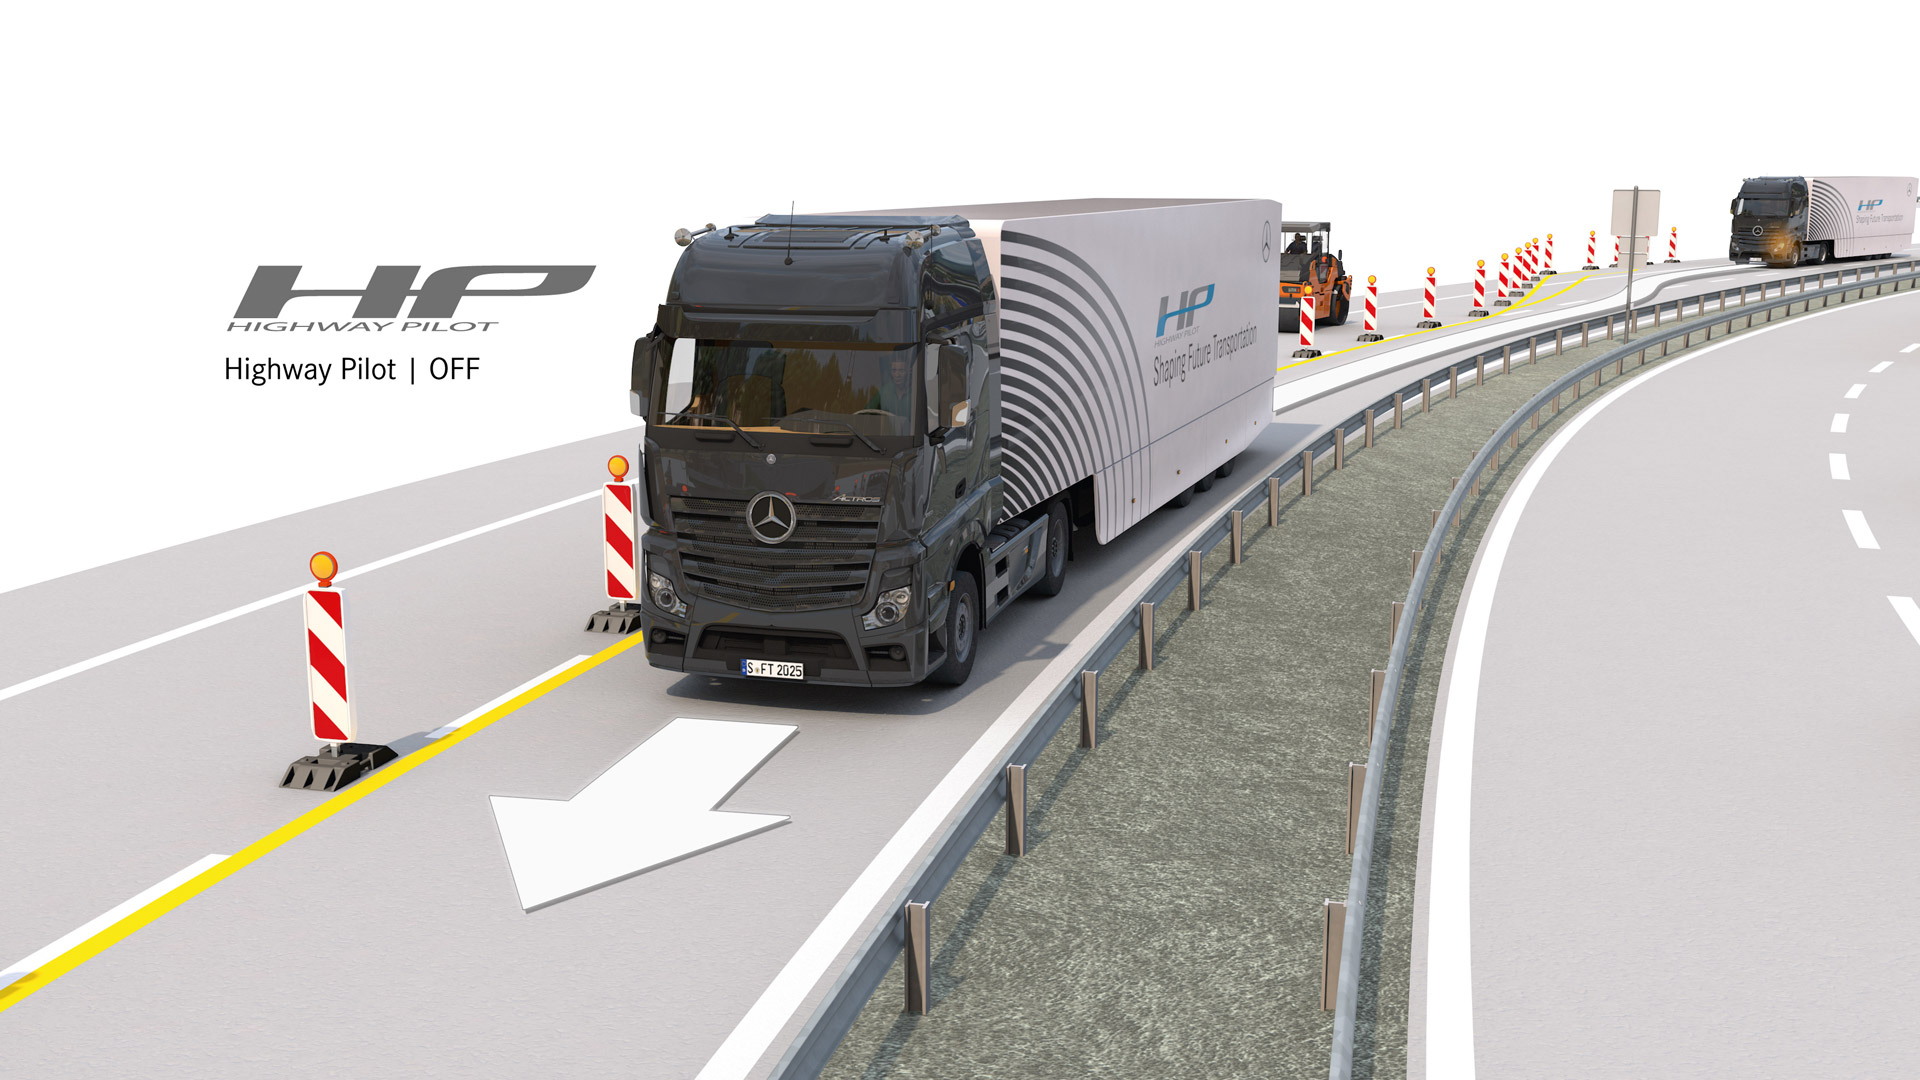 Production-ready Mercedes-Benz Actros truck fitted with Highway Pilot autonomous driving system